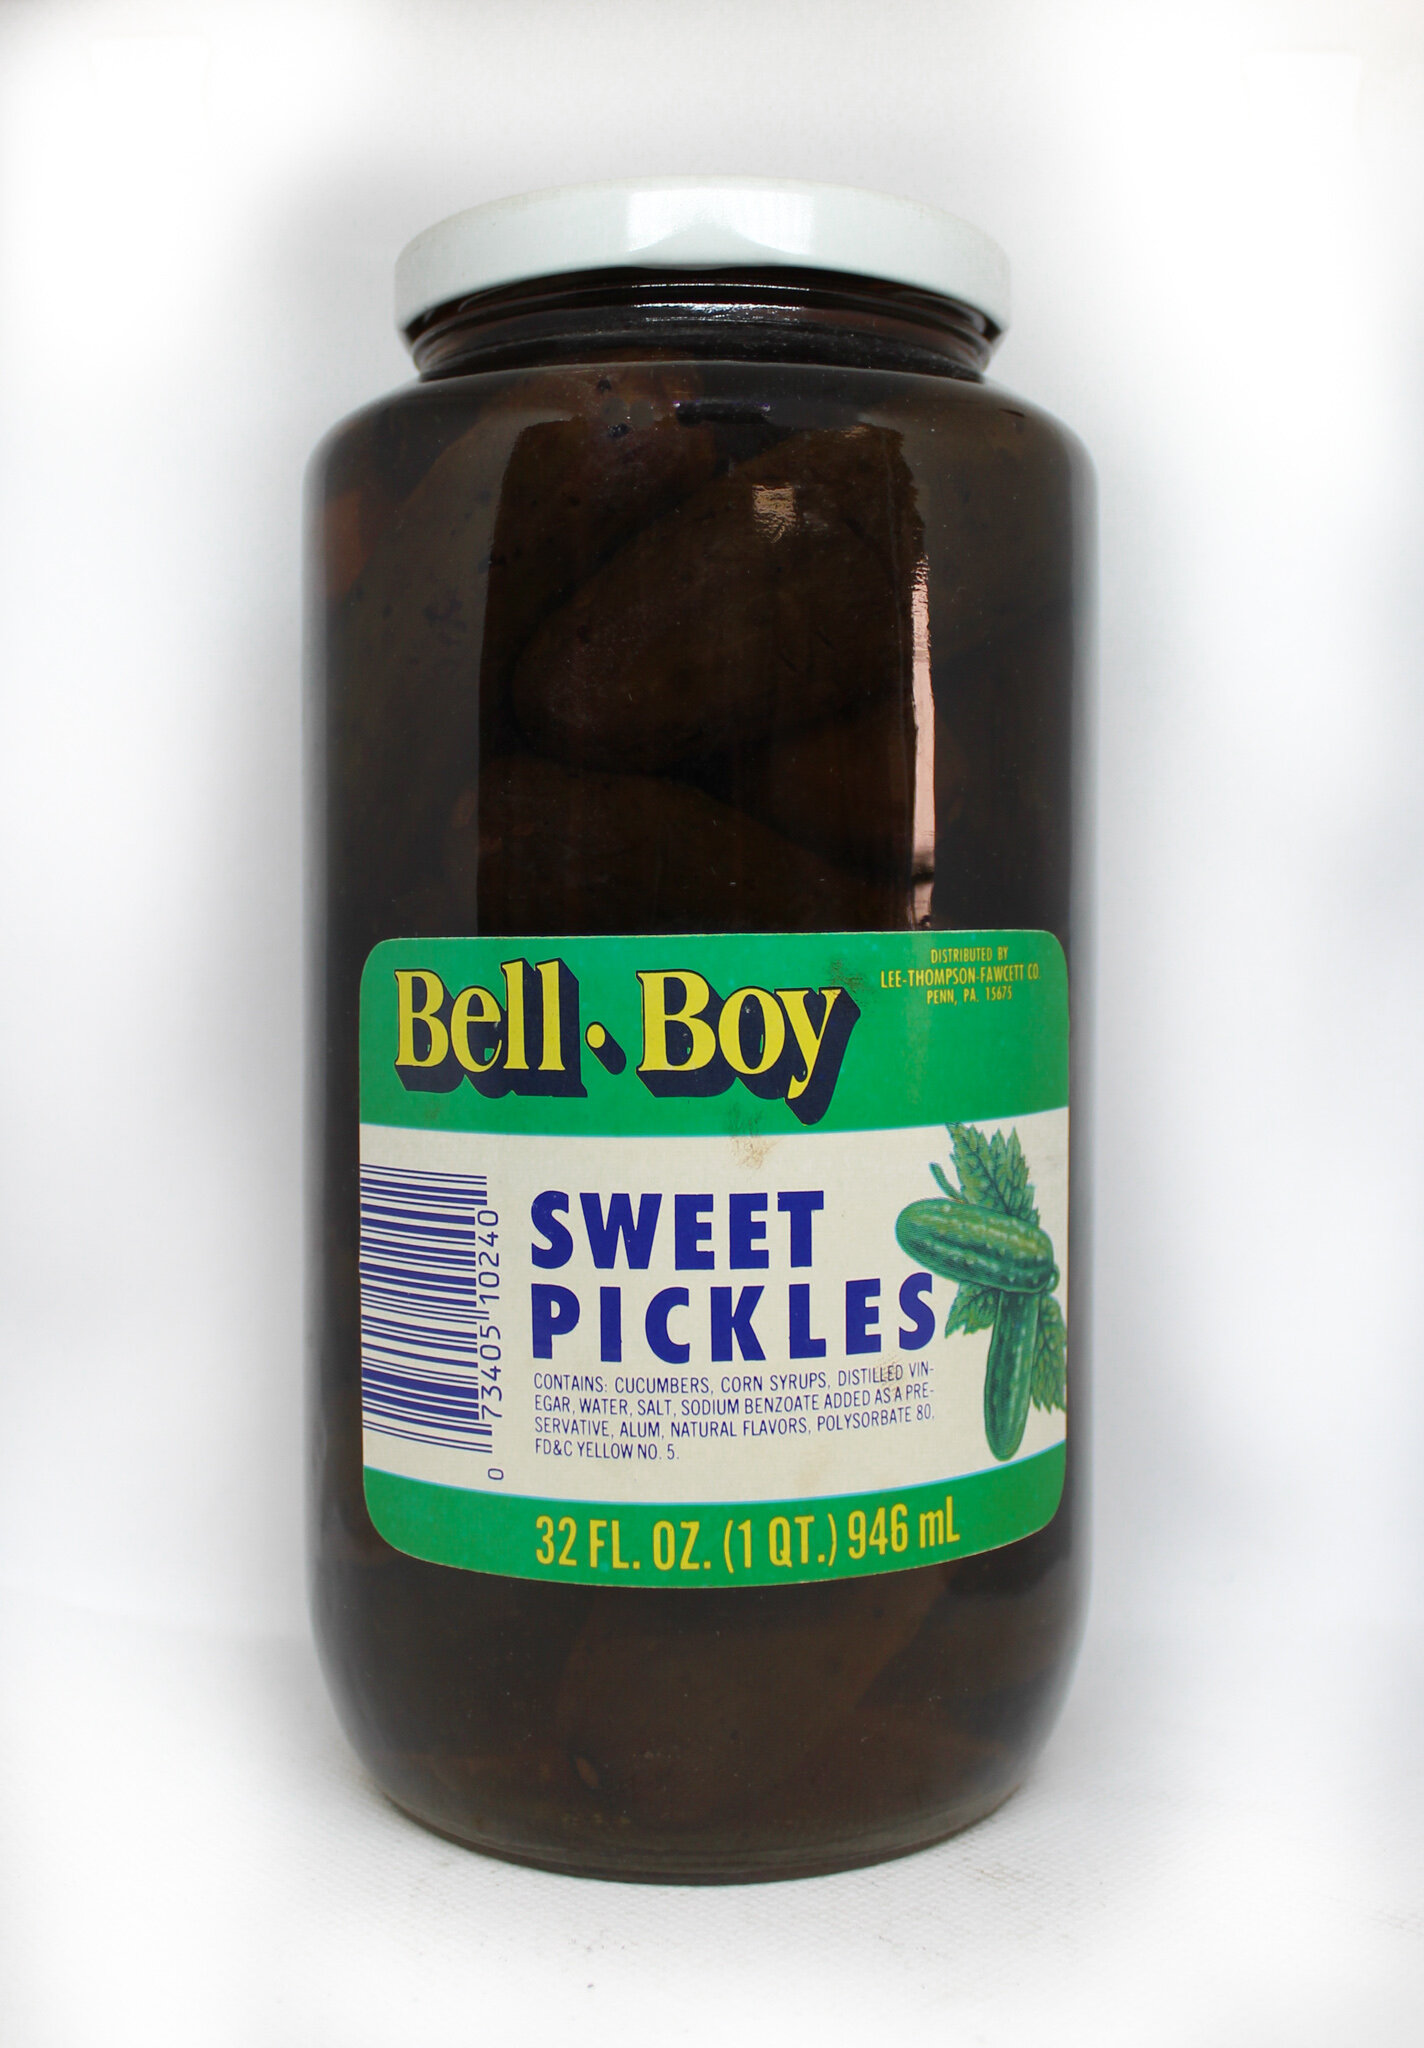 Bell-Boy Pickles was an older variation of the brand. 